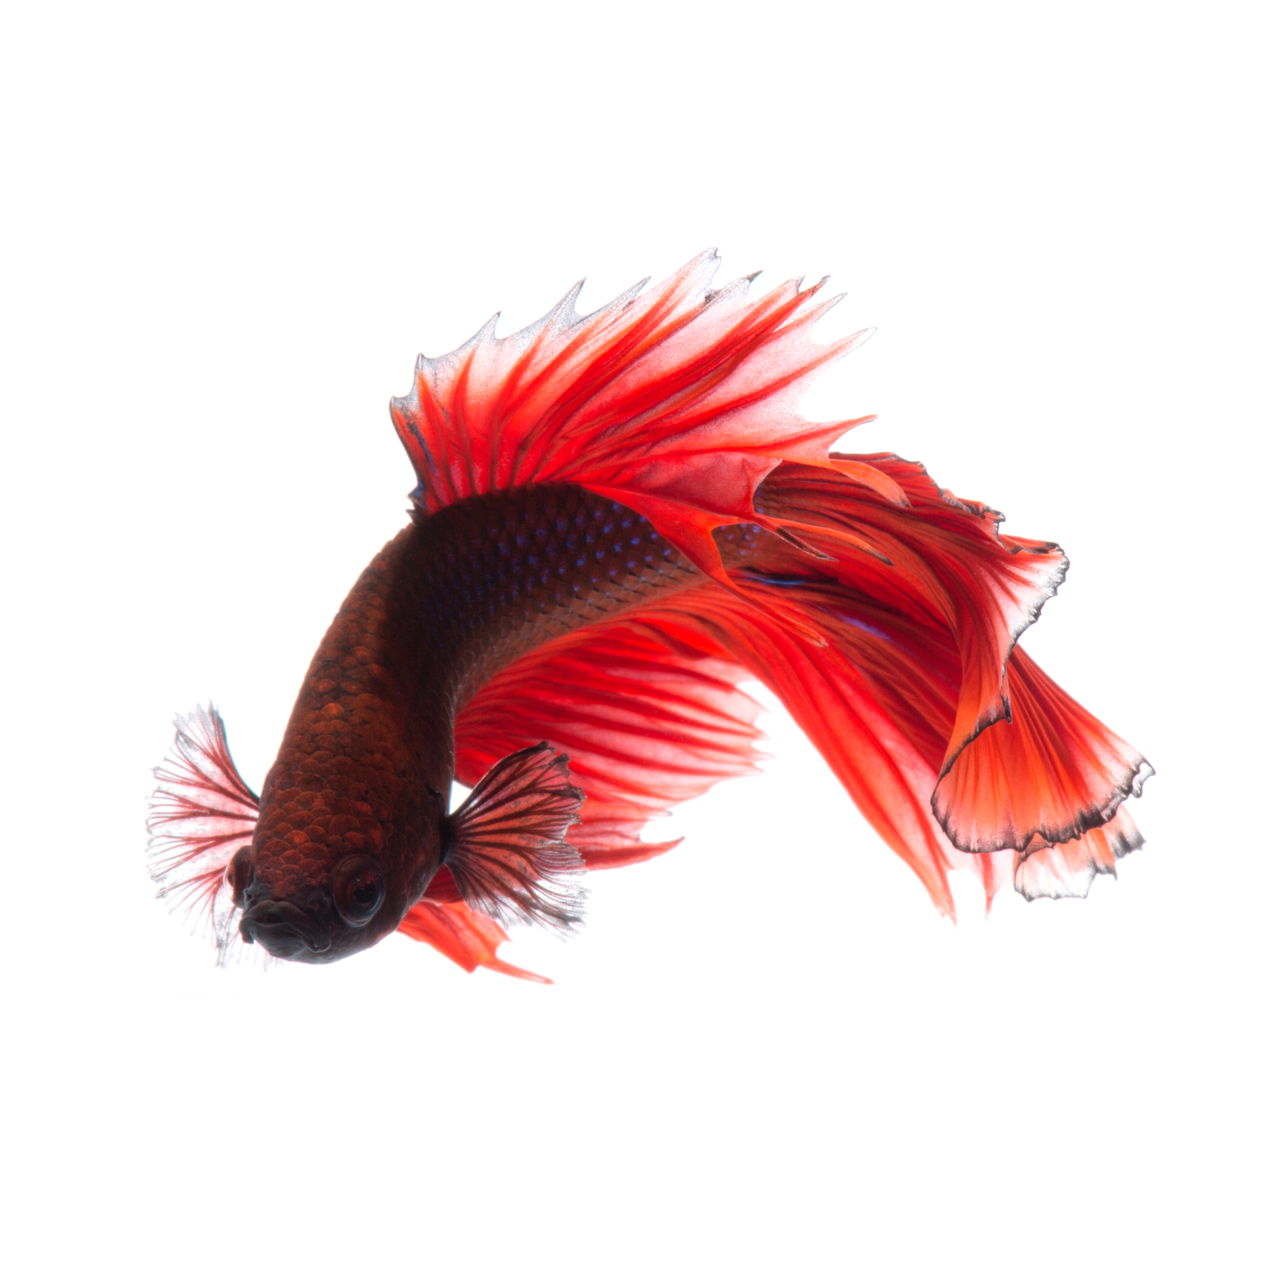 We Suggest Adorable Names for Your Delicate Darling Betta Fish - Pet Ponder